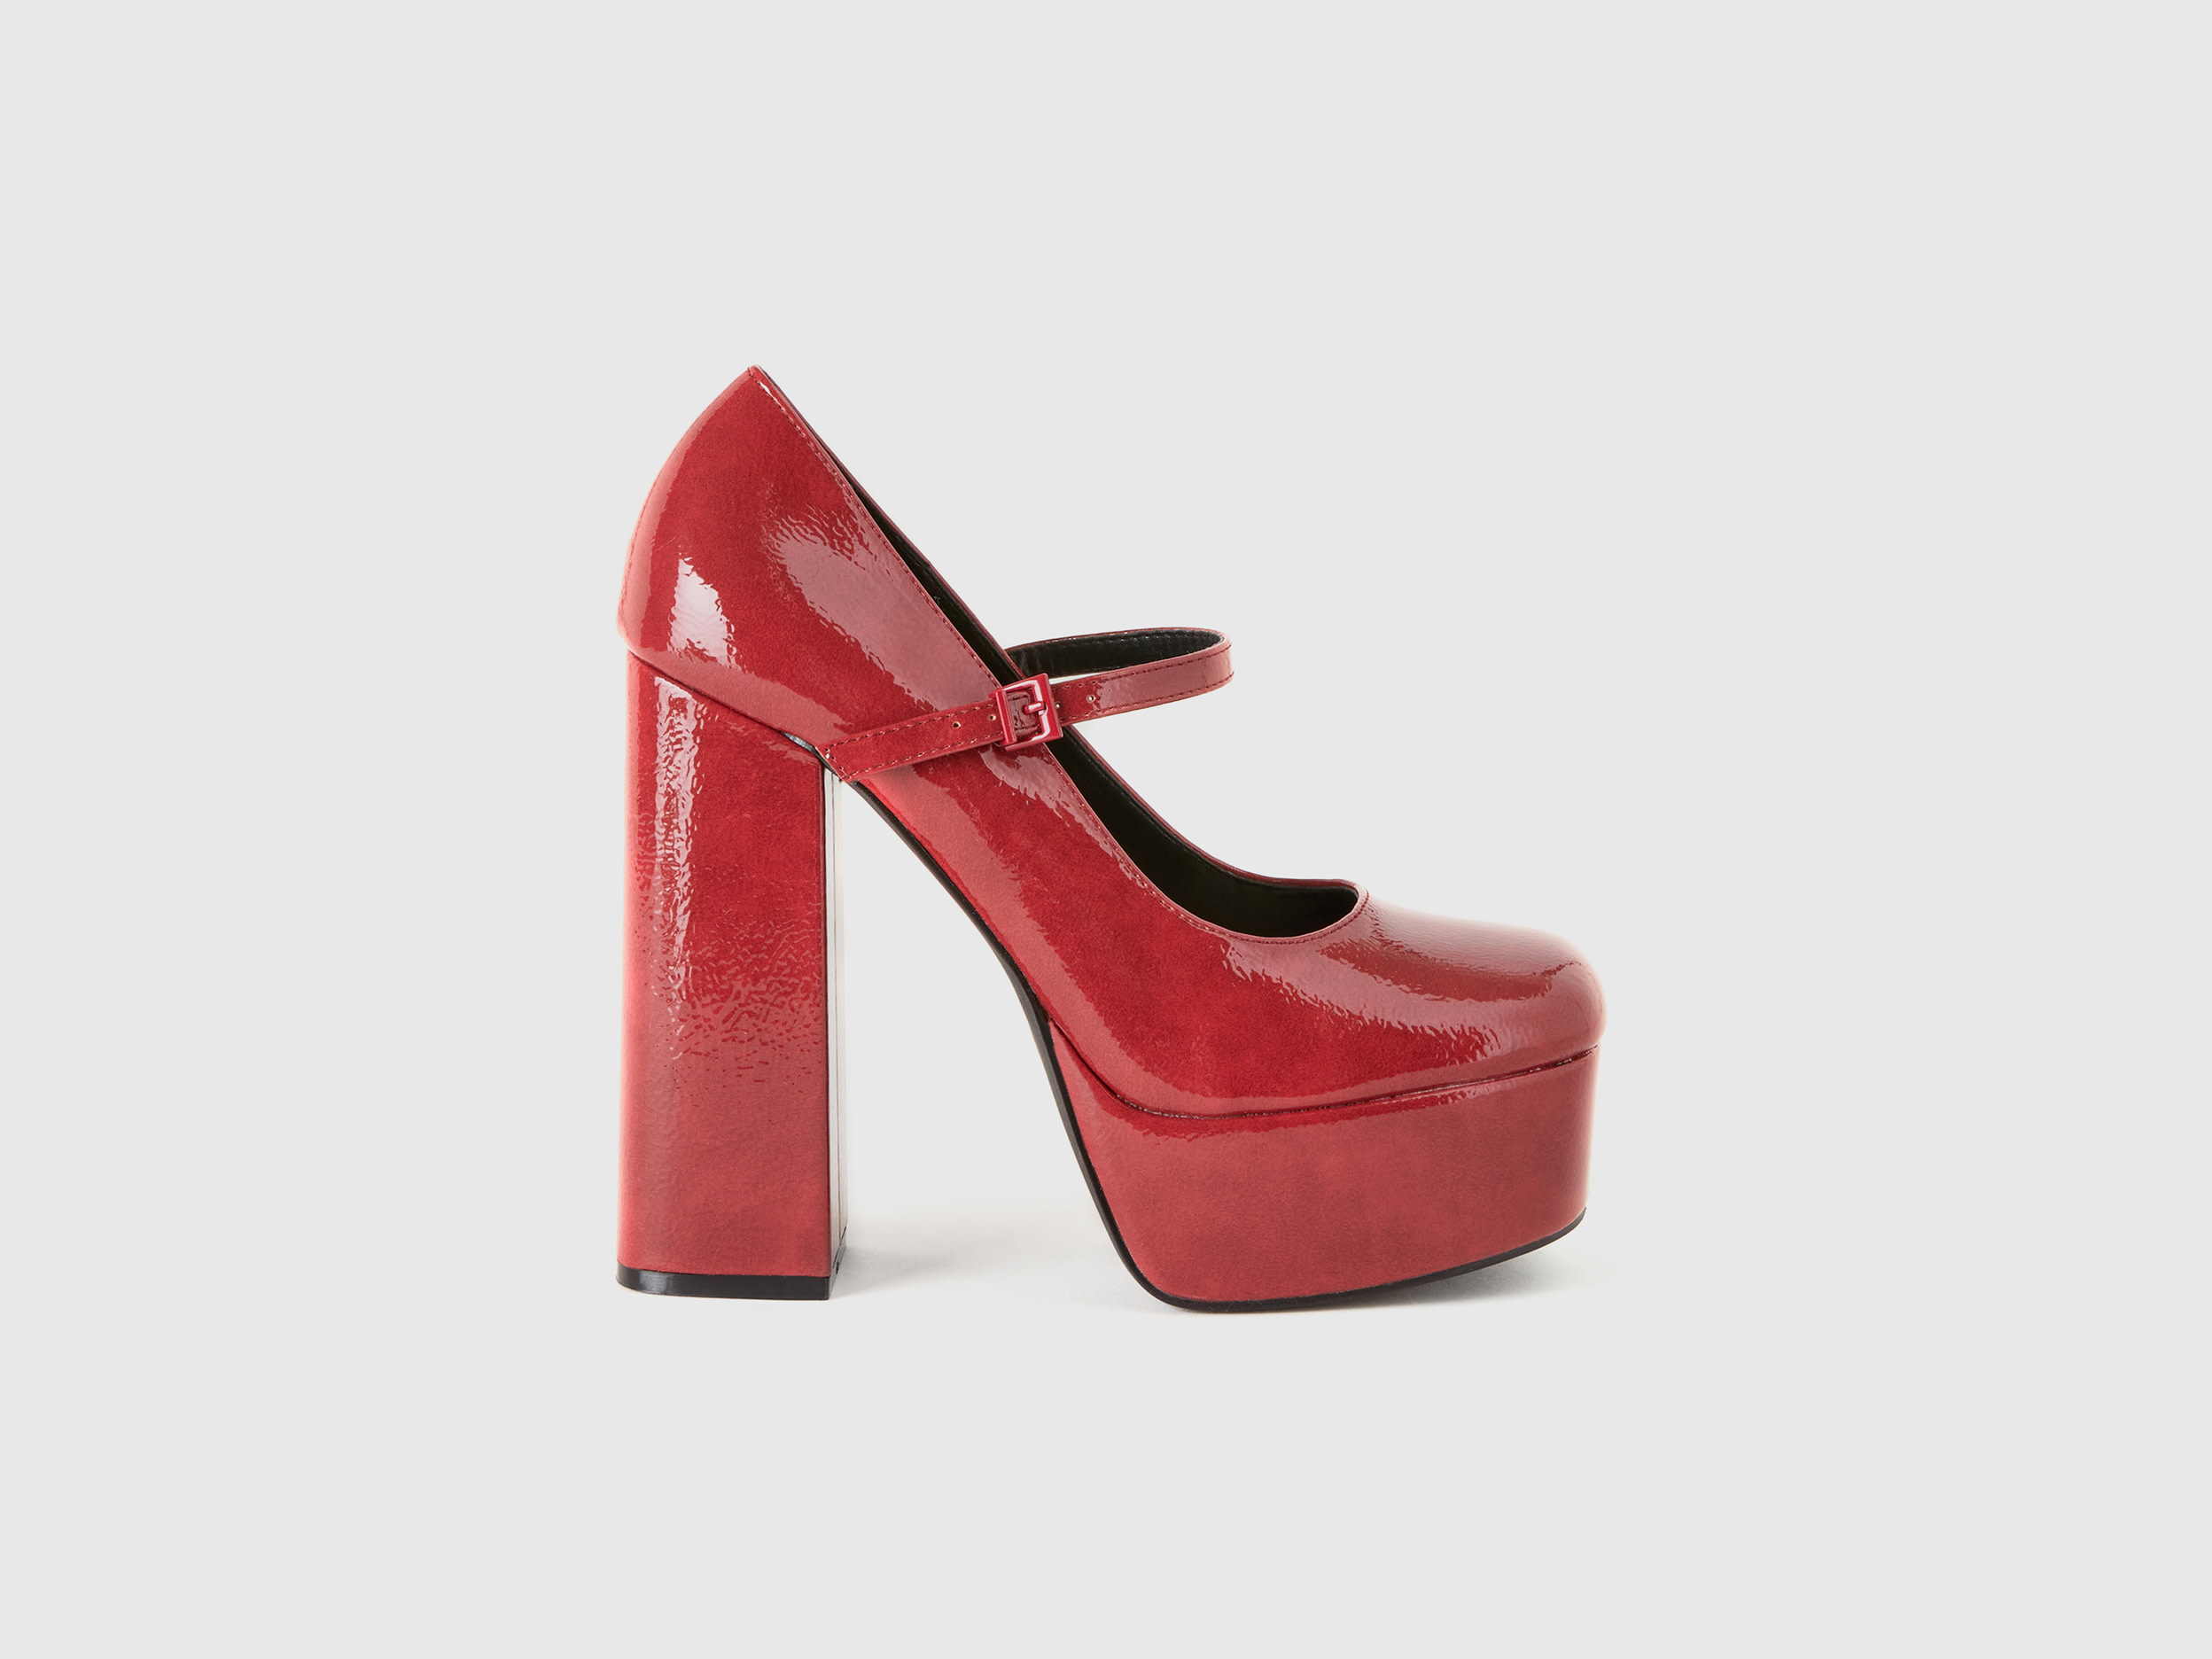 Benetton, Glossy Pumps With Heel And Buckle, size 4,5, Red, Women